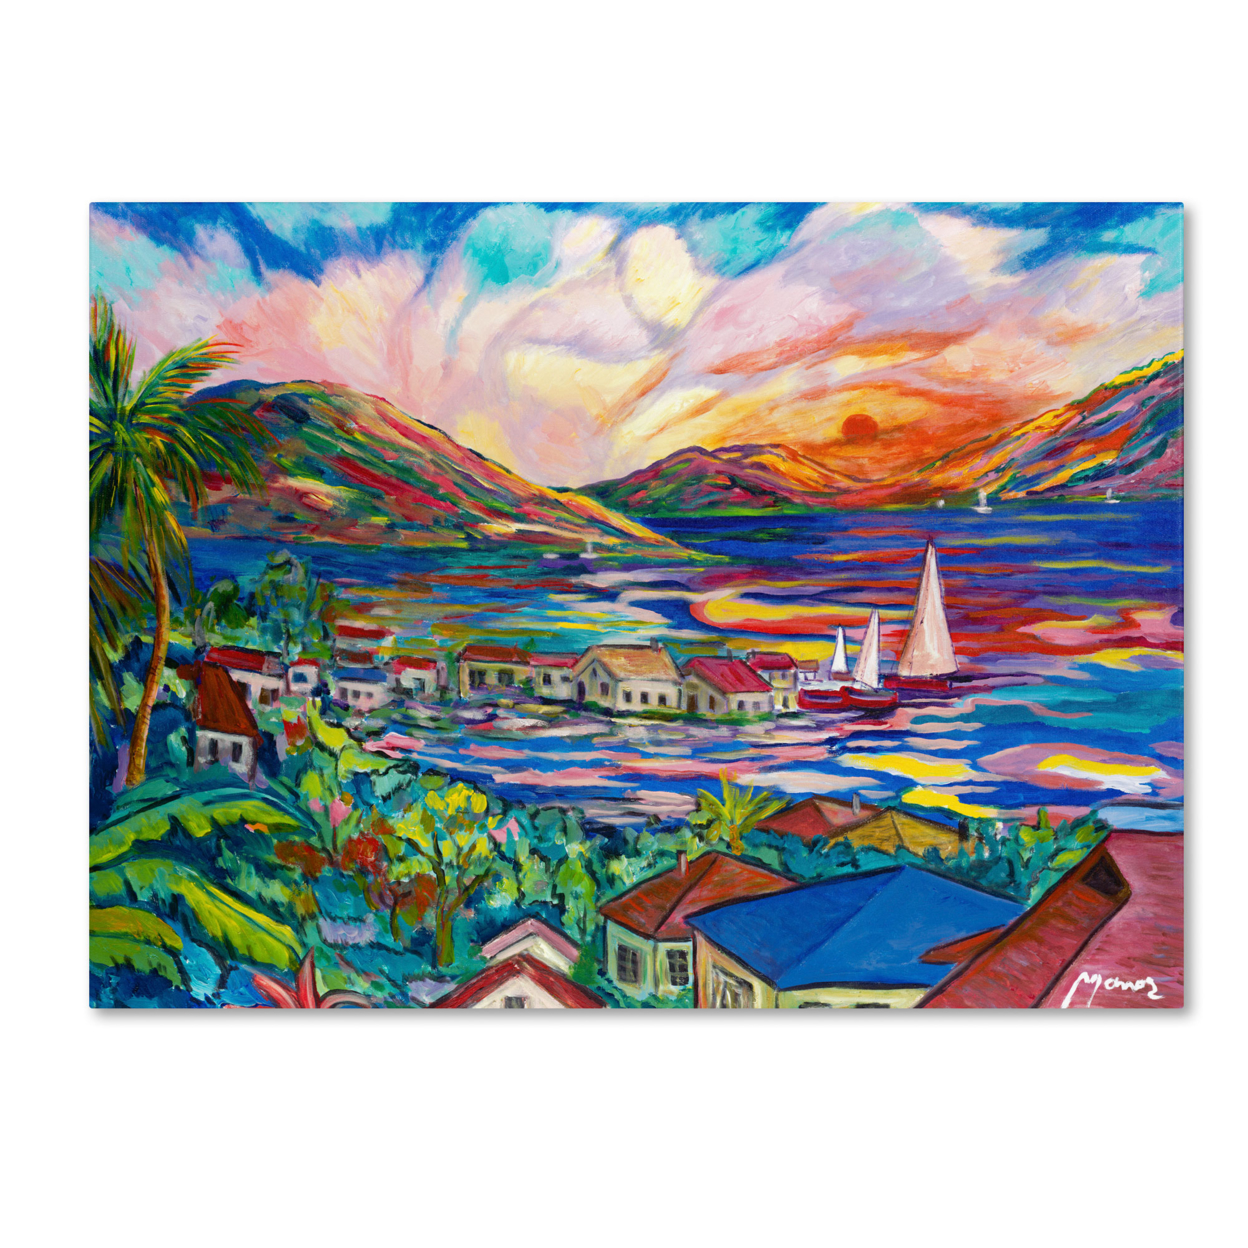 Manor Shadian 'Sunset' Canvas Wall Art 35 X 47 Inches